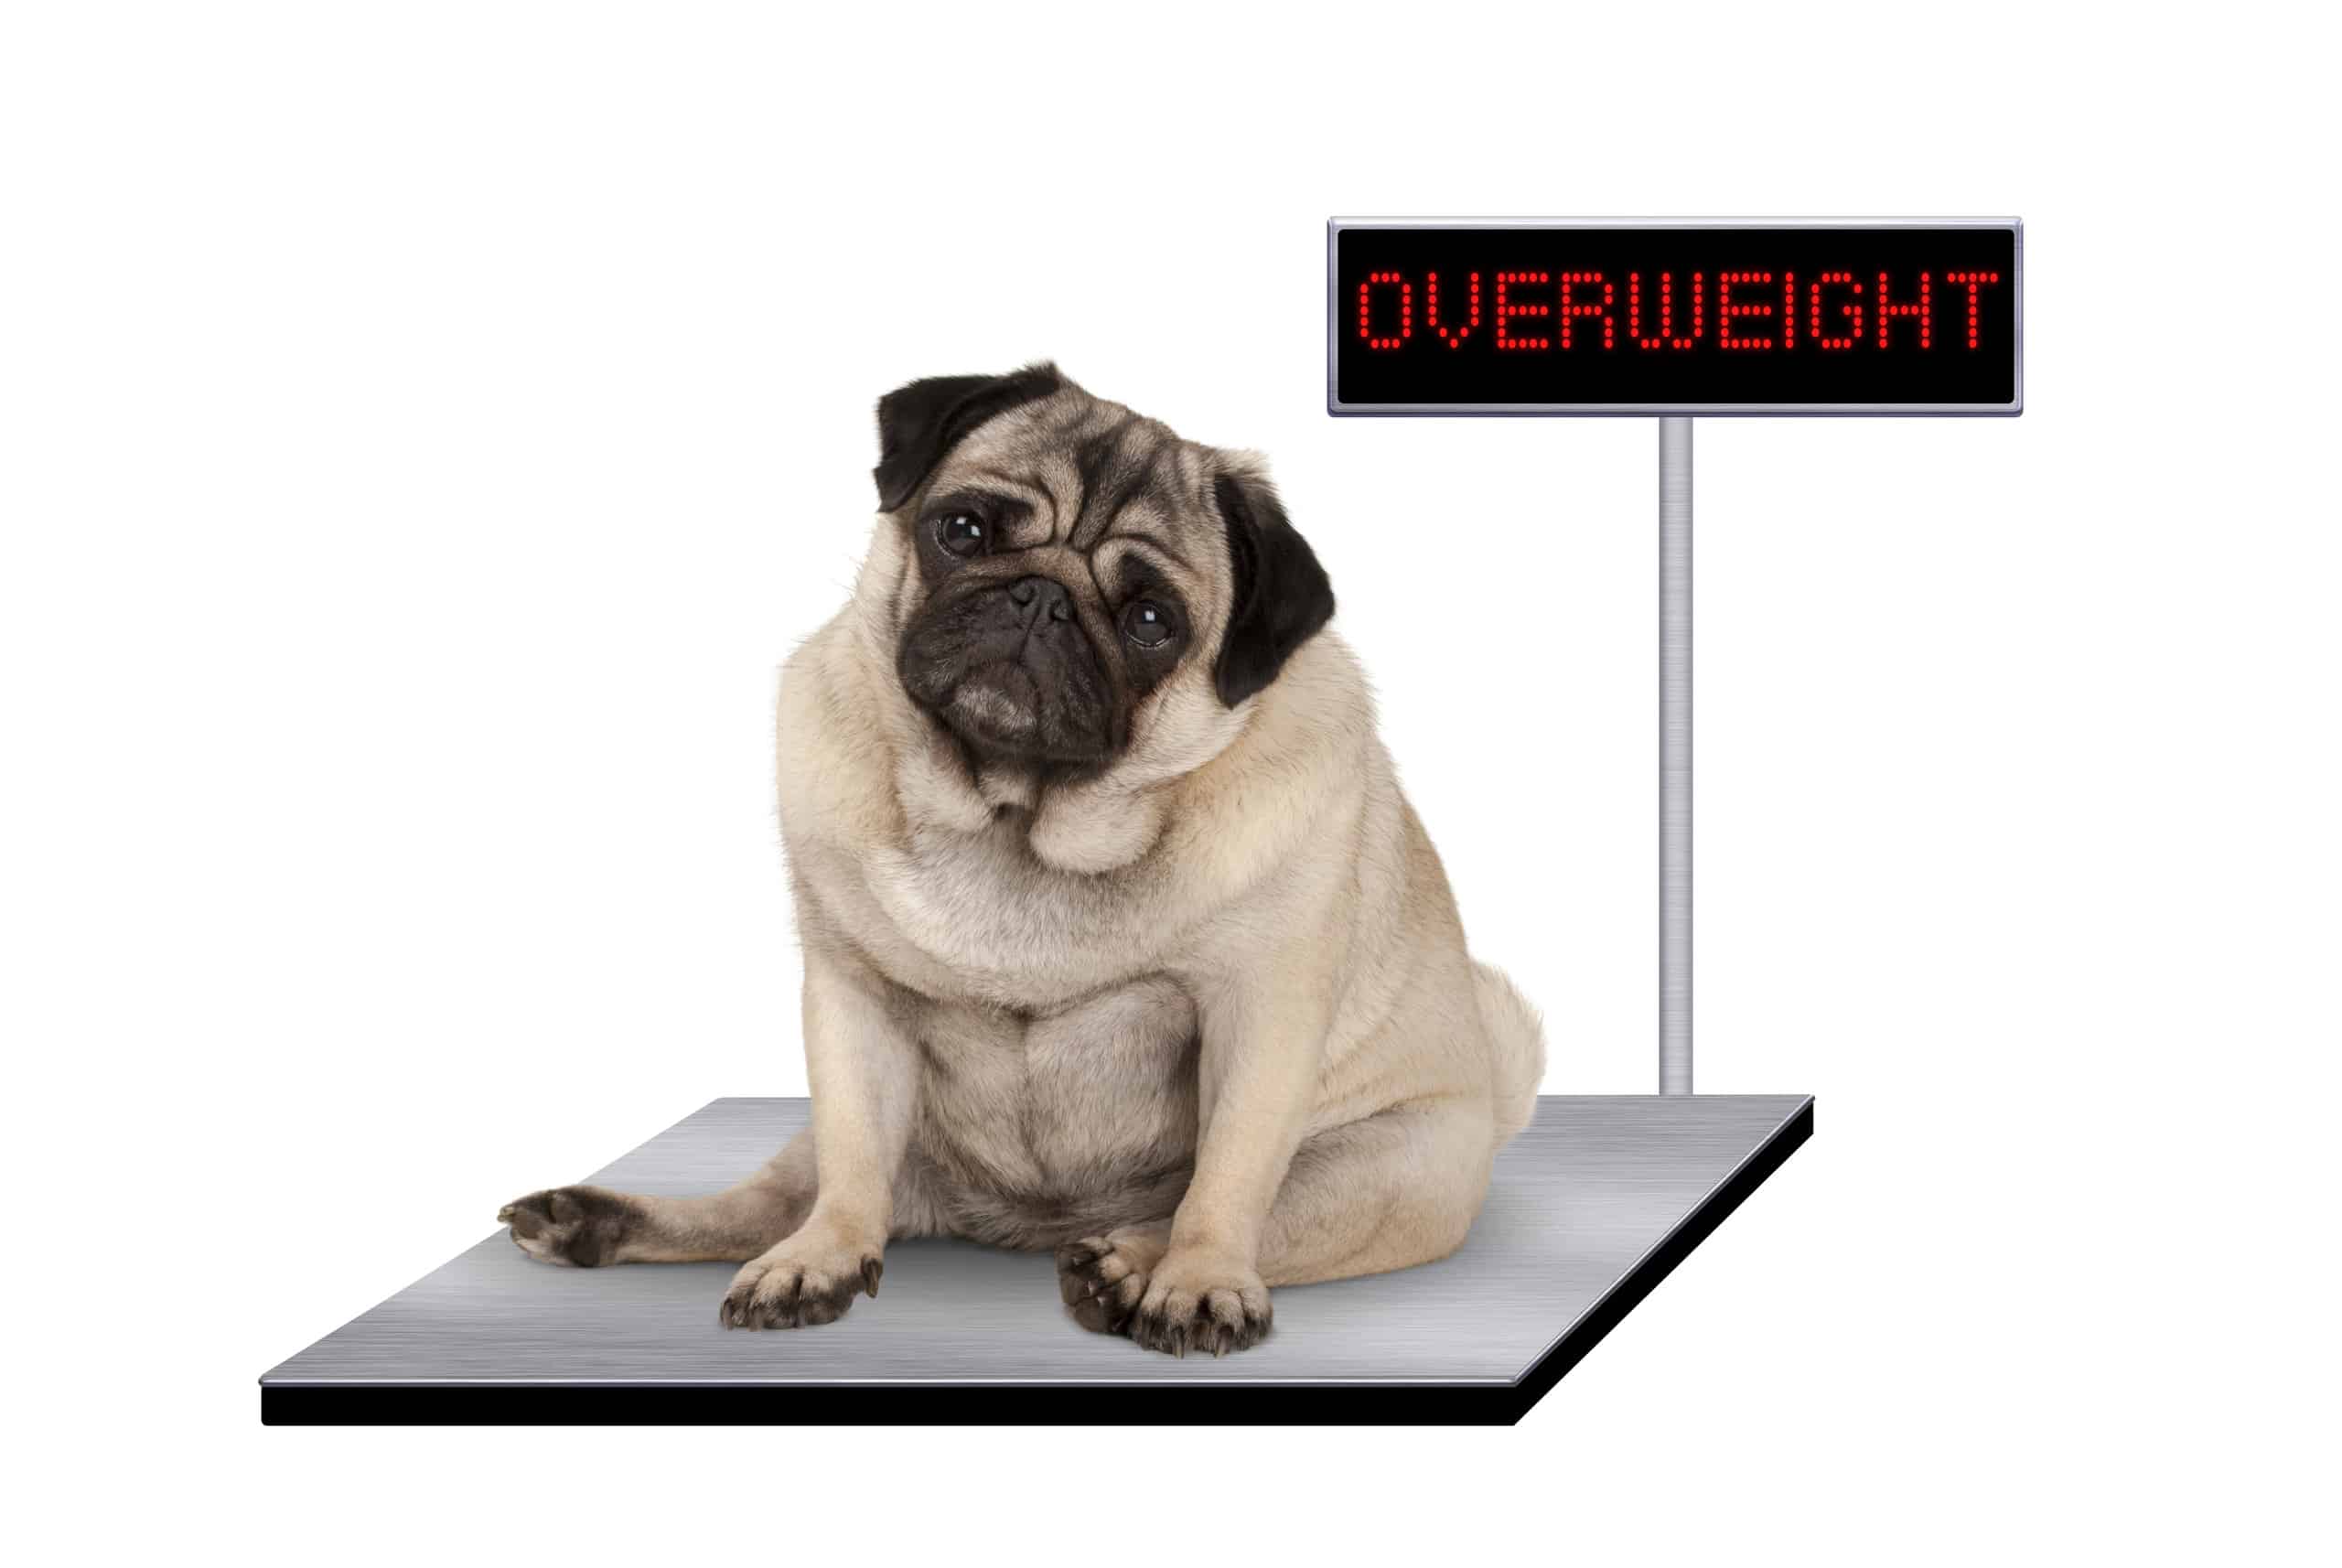 Fat pug sitting on a scale with the word "overweight"